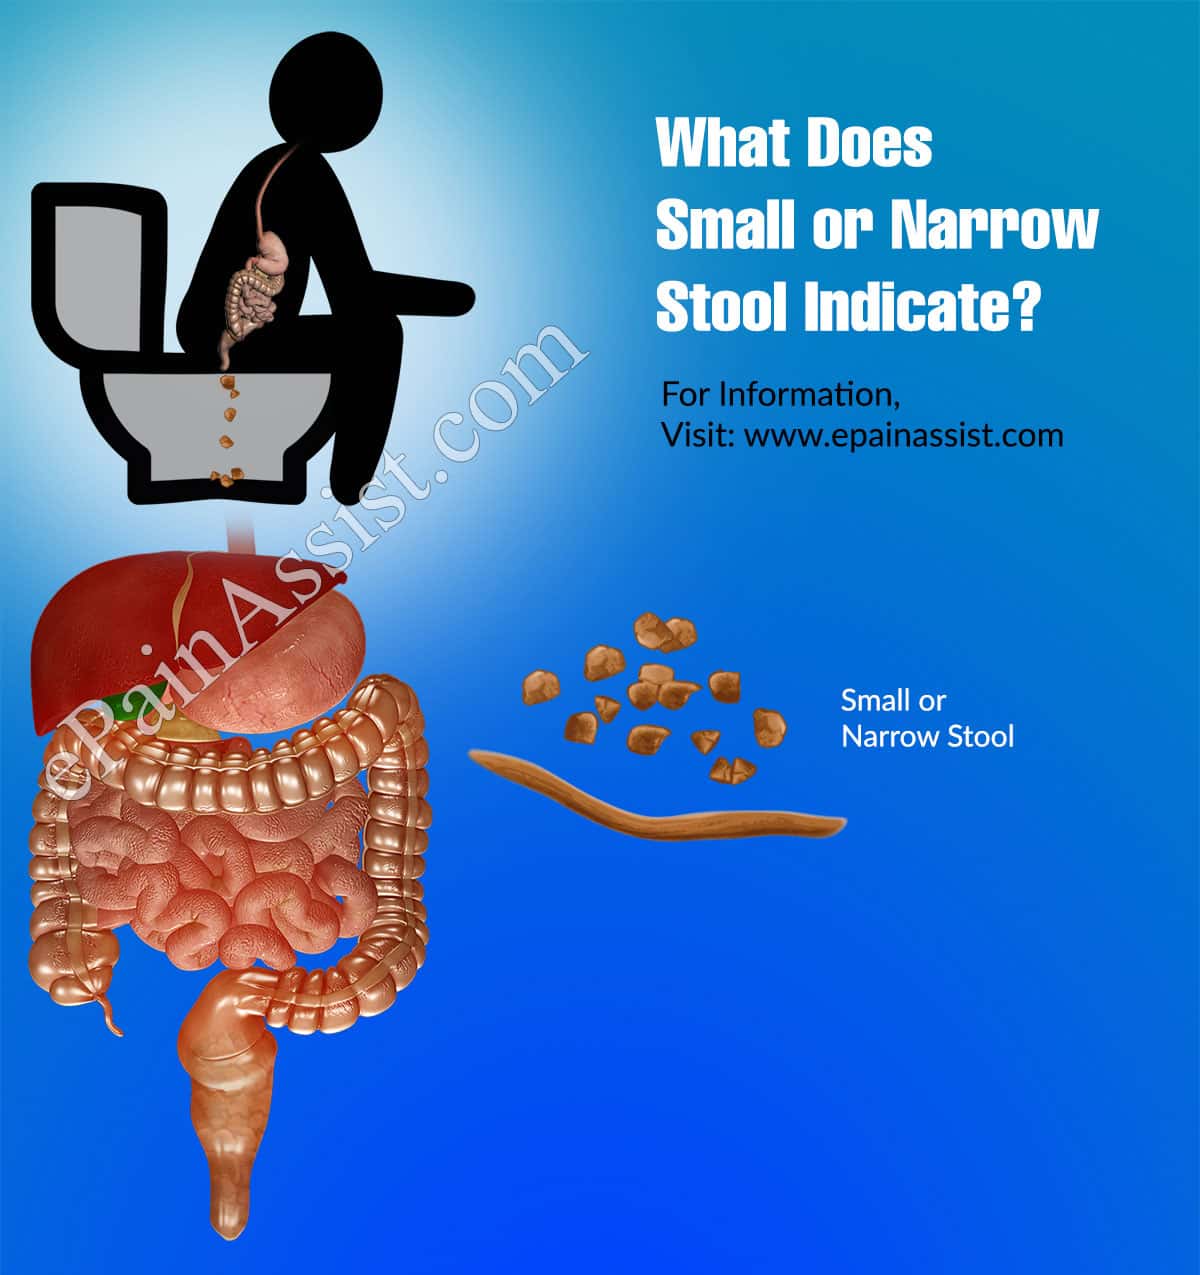 What Does Small or Narrow Stool Indicate?